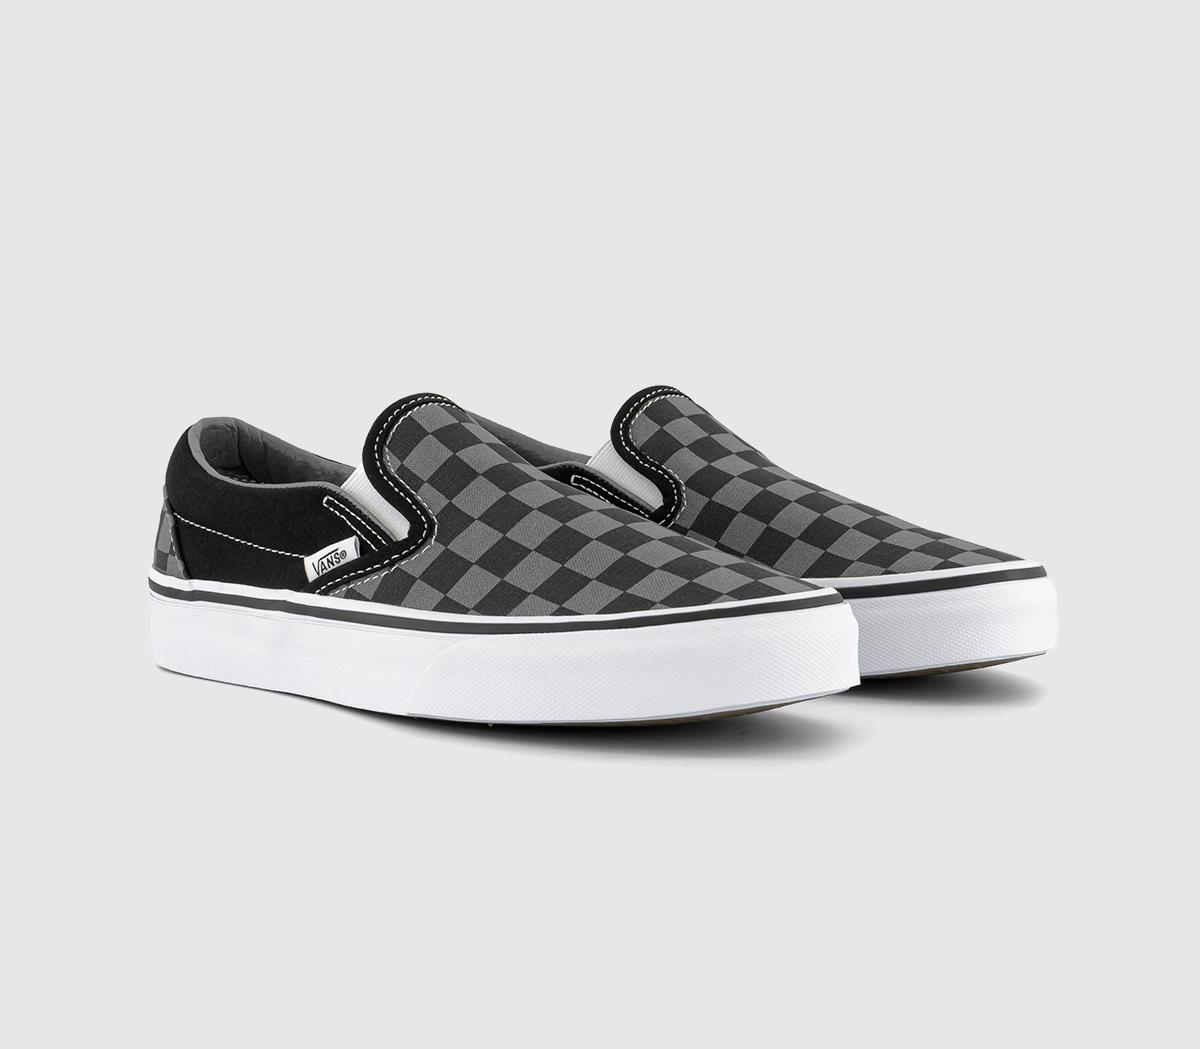 Vans Classic Slip On Check In Black And Grey, 10